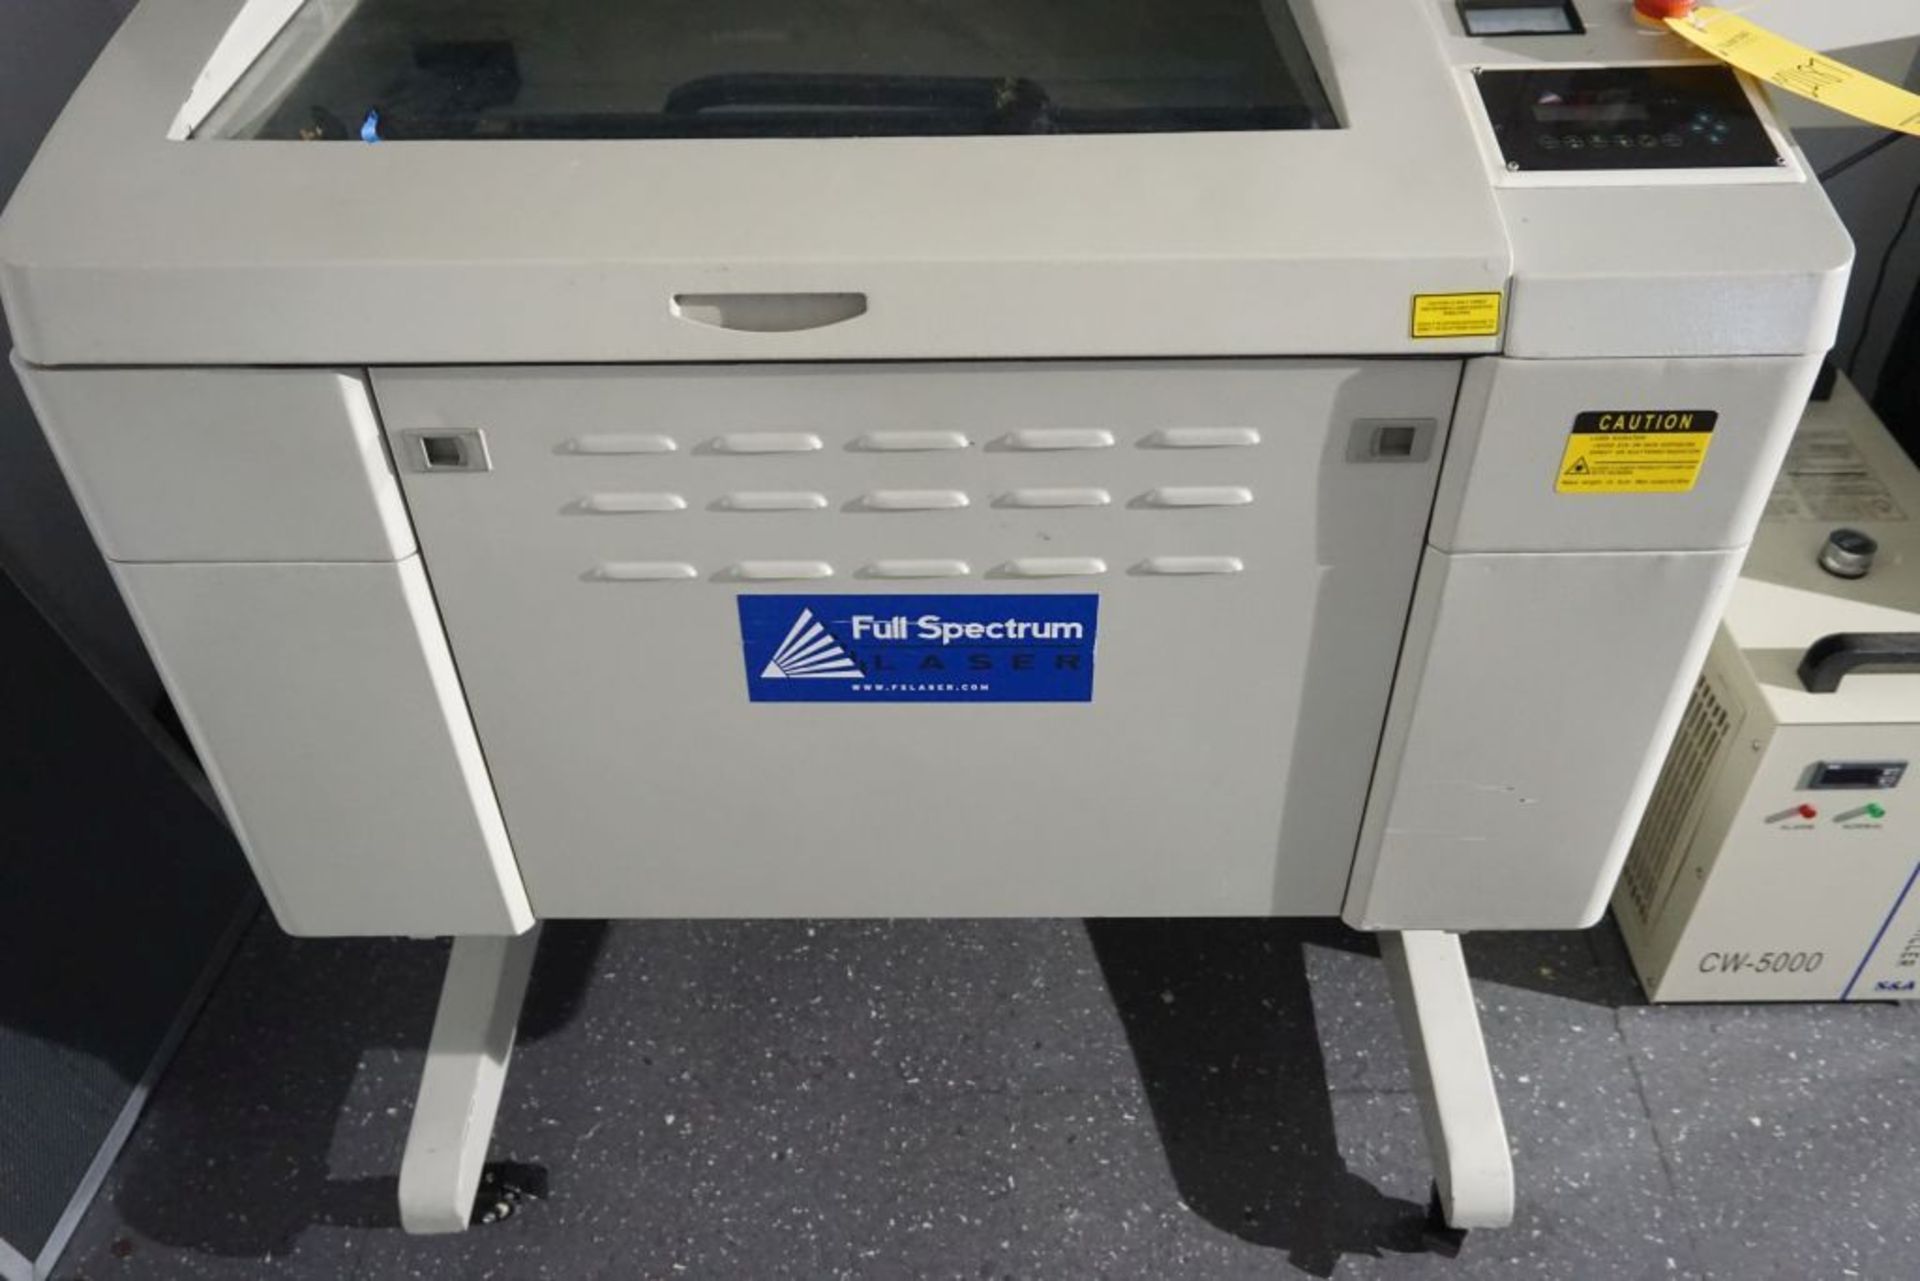 Full Spectrum 90Watt Laser Marking and Etching System|Model: PS 2418; Includes: CW-5000 Industrial - Image 3 of 18